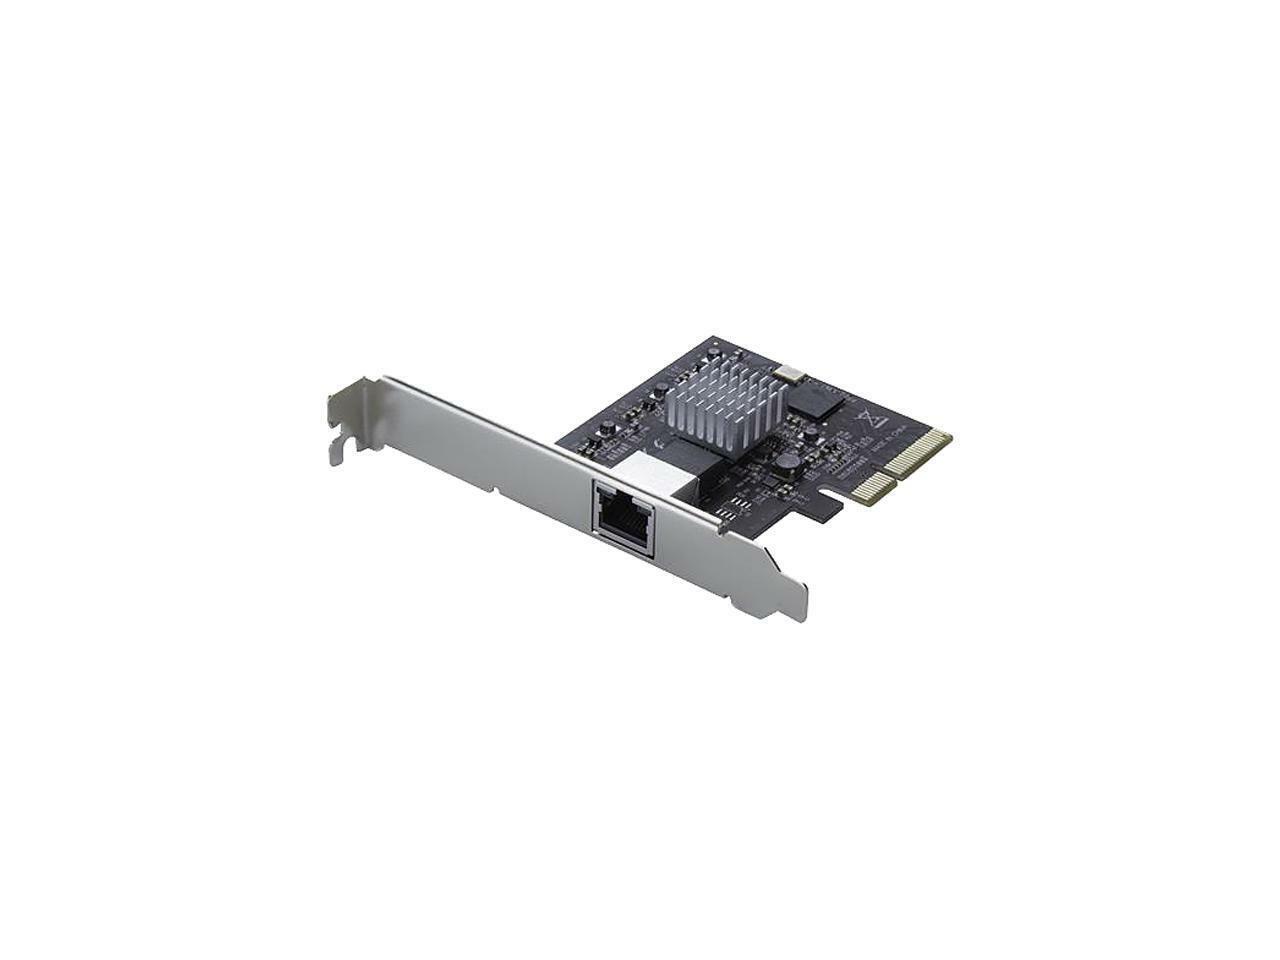 StarTech.com ST5GPEXNB NBASE-T PCIe Network Card - 1 Port - 5G / 2.5G / 1G and 1